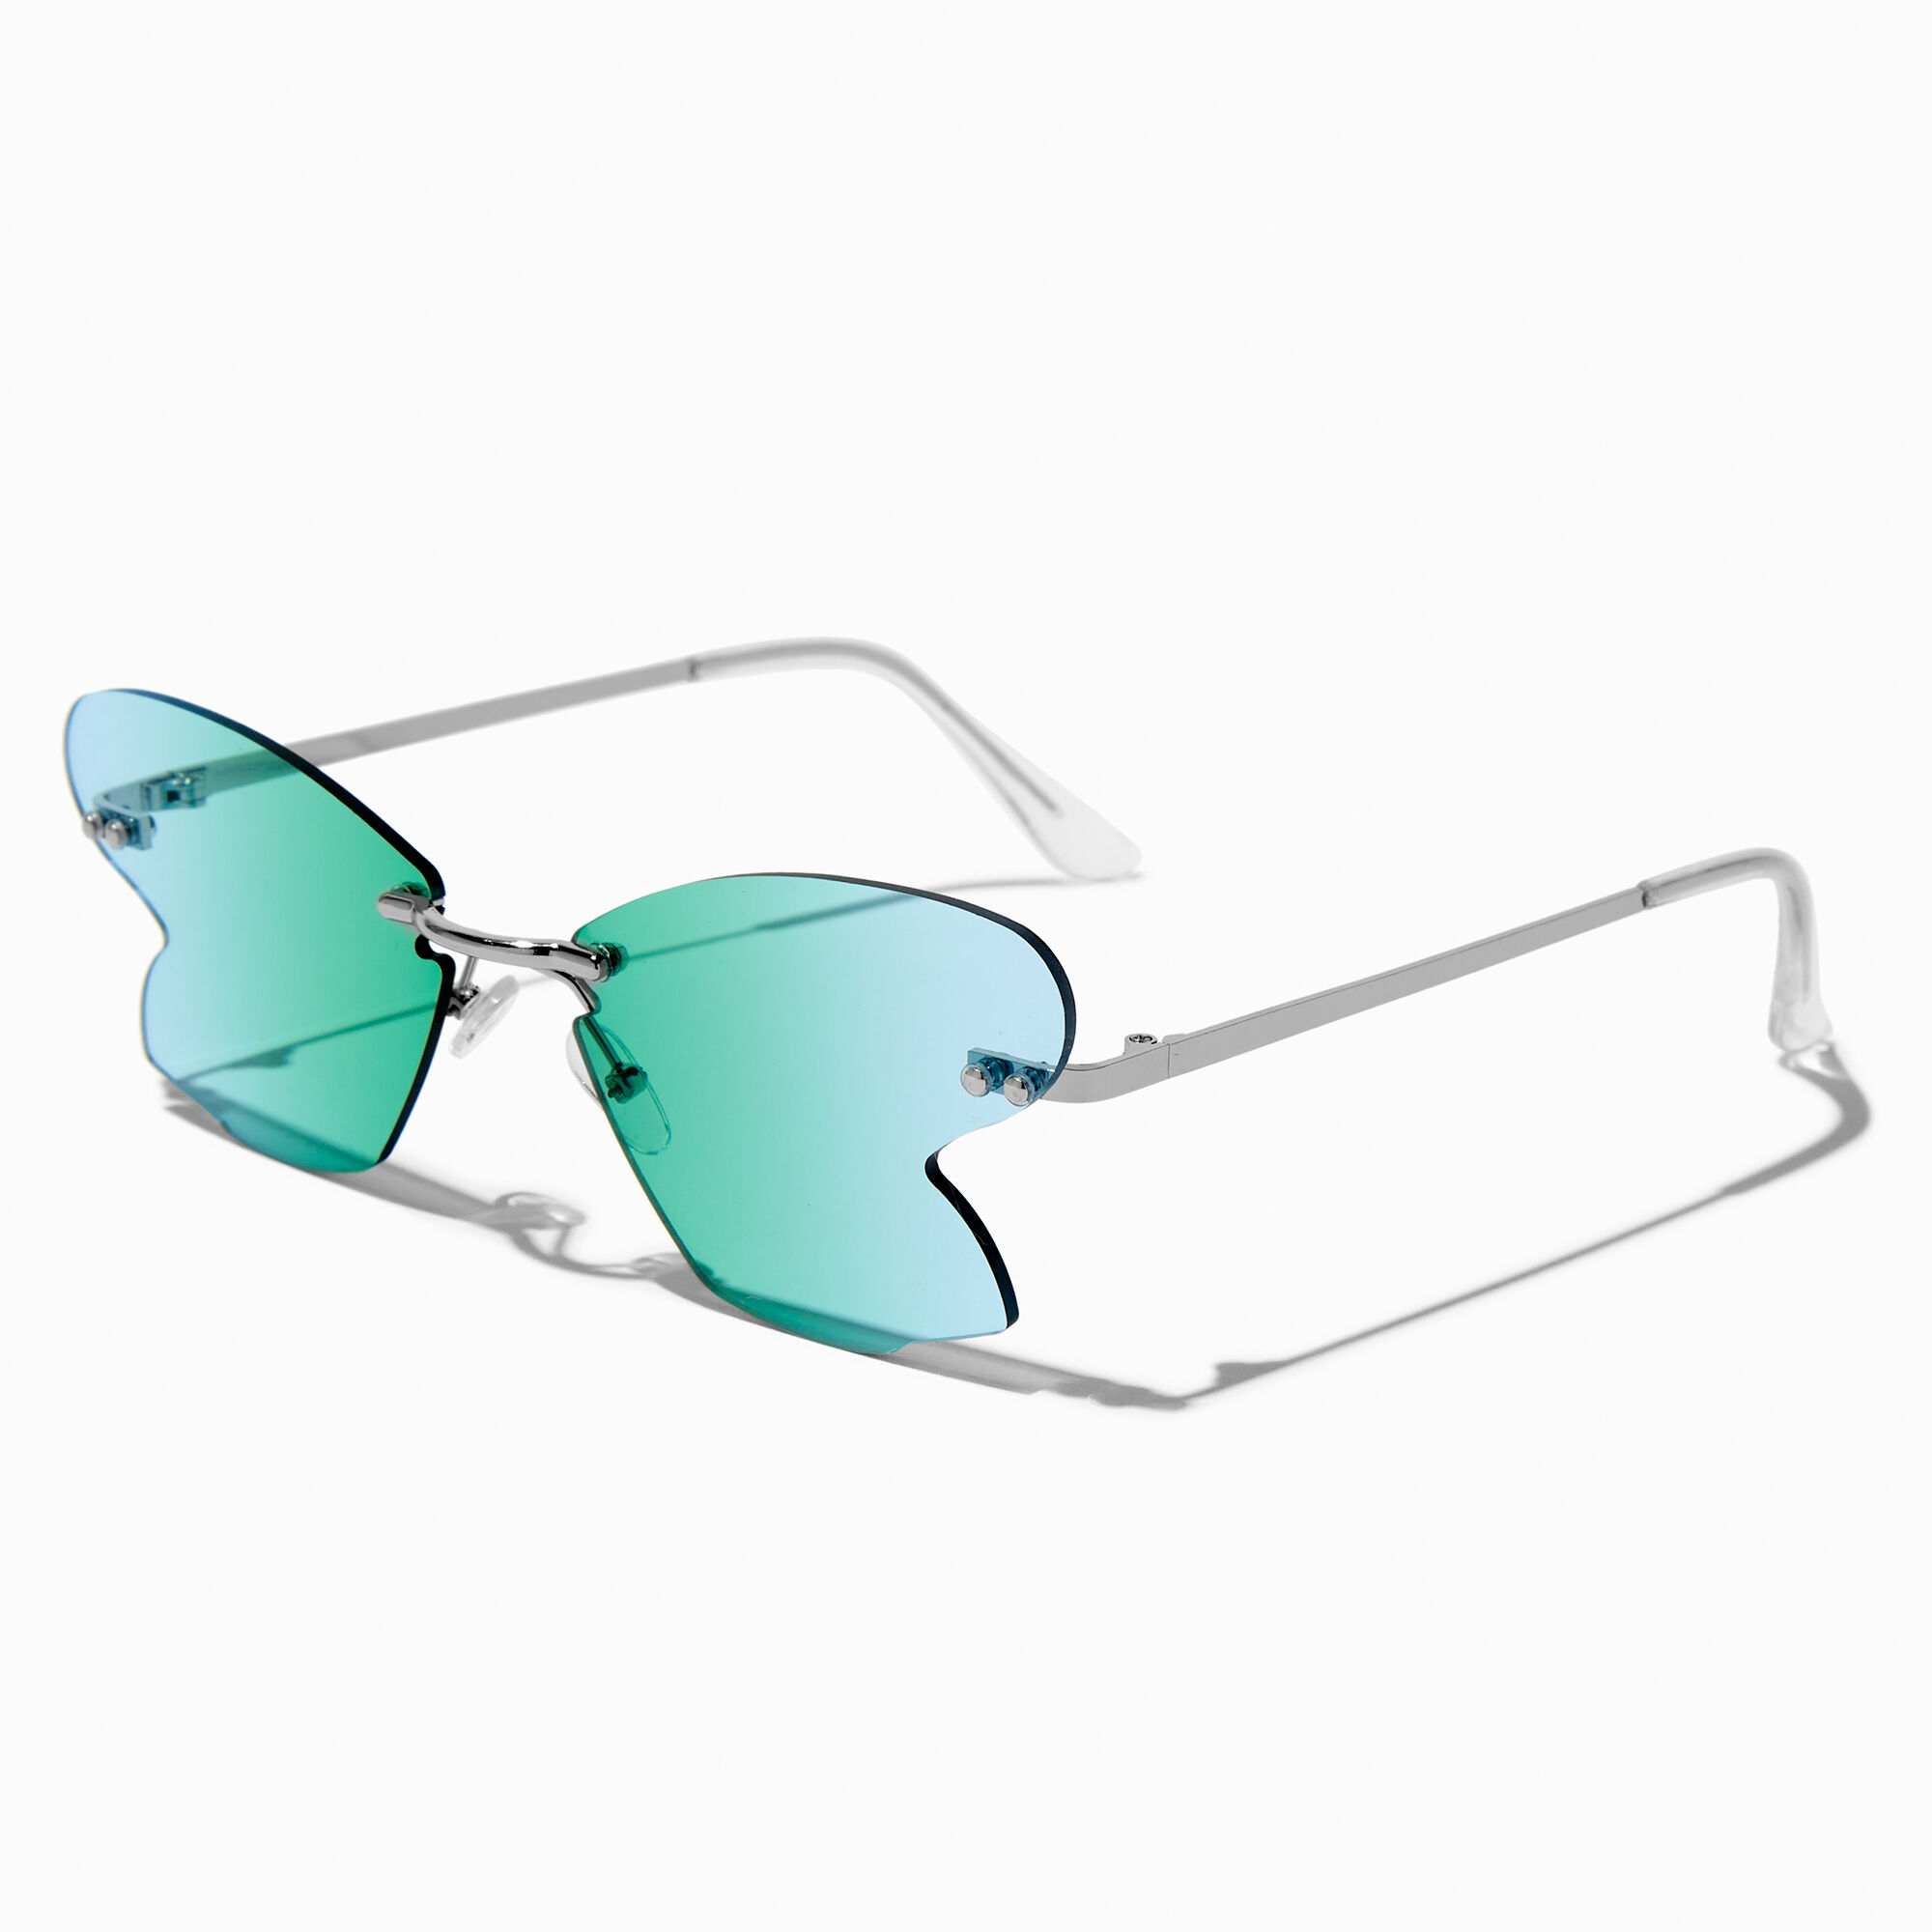 View Claires BlueGreen Butterfly Wing Sunglasses information